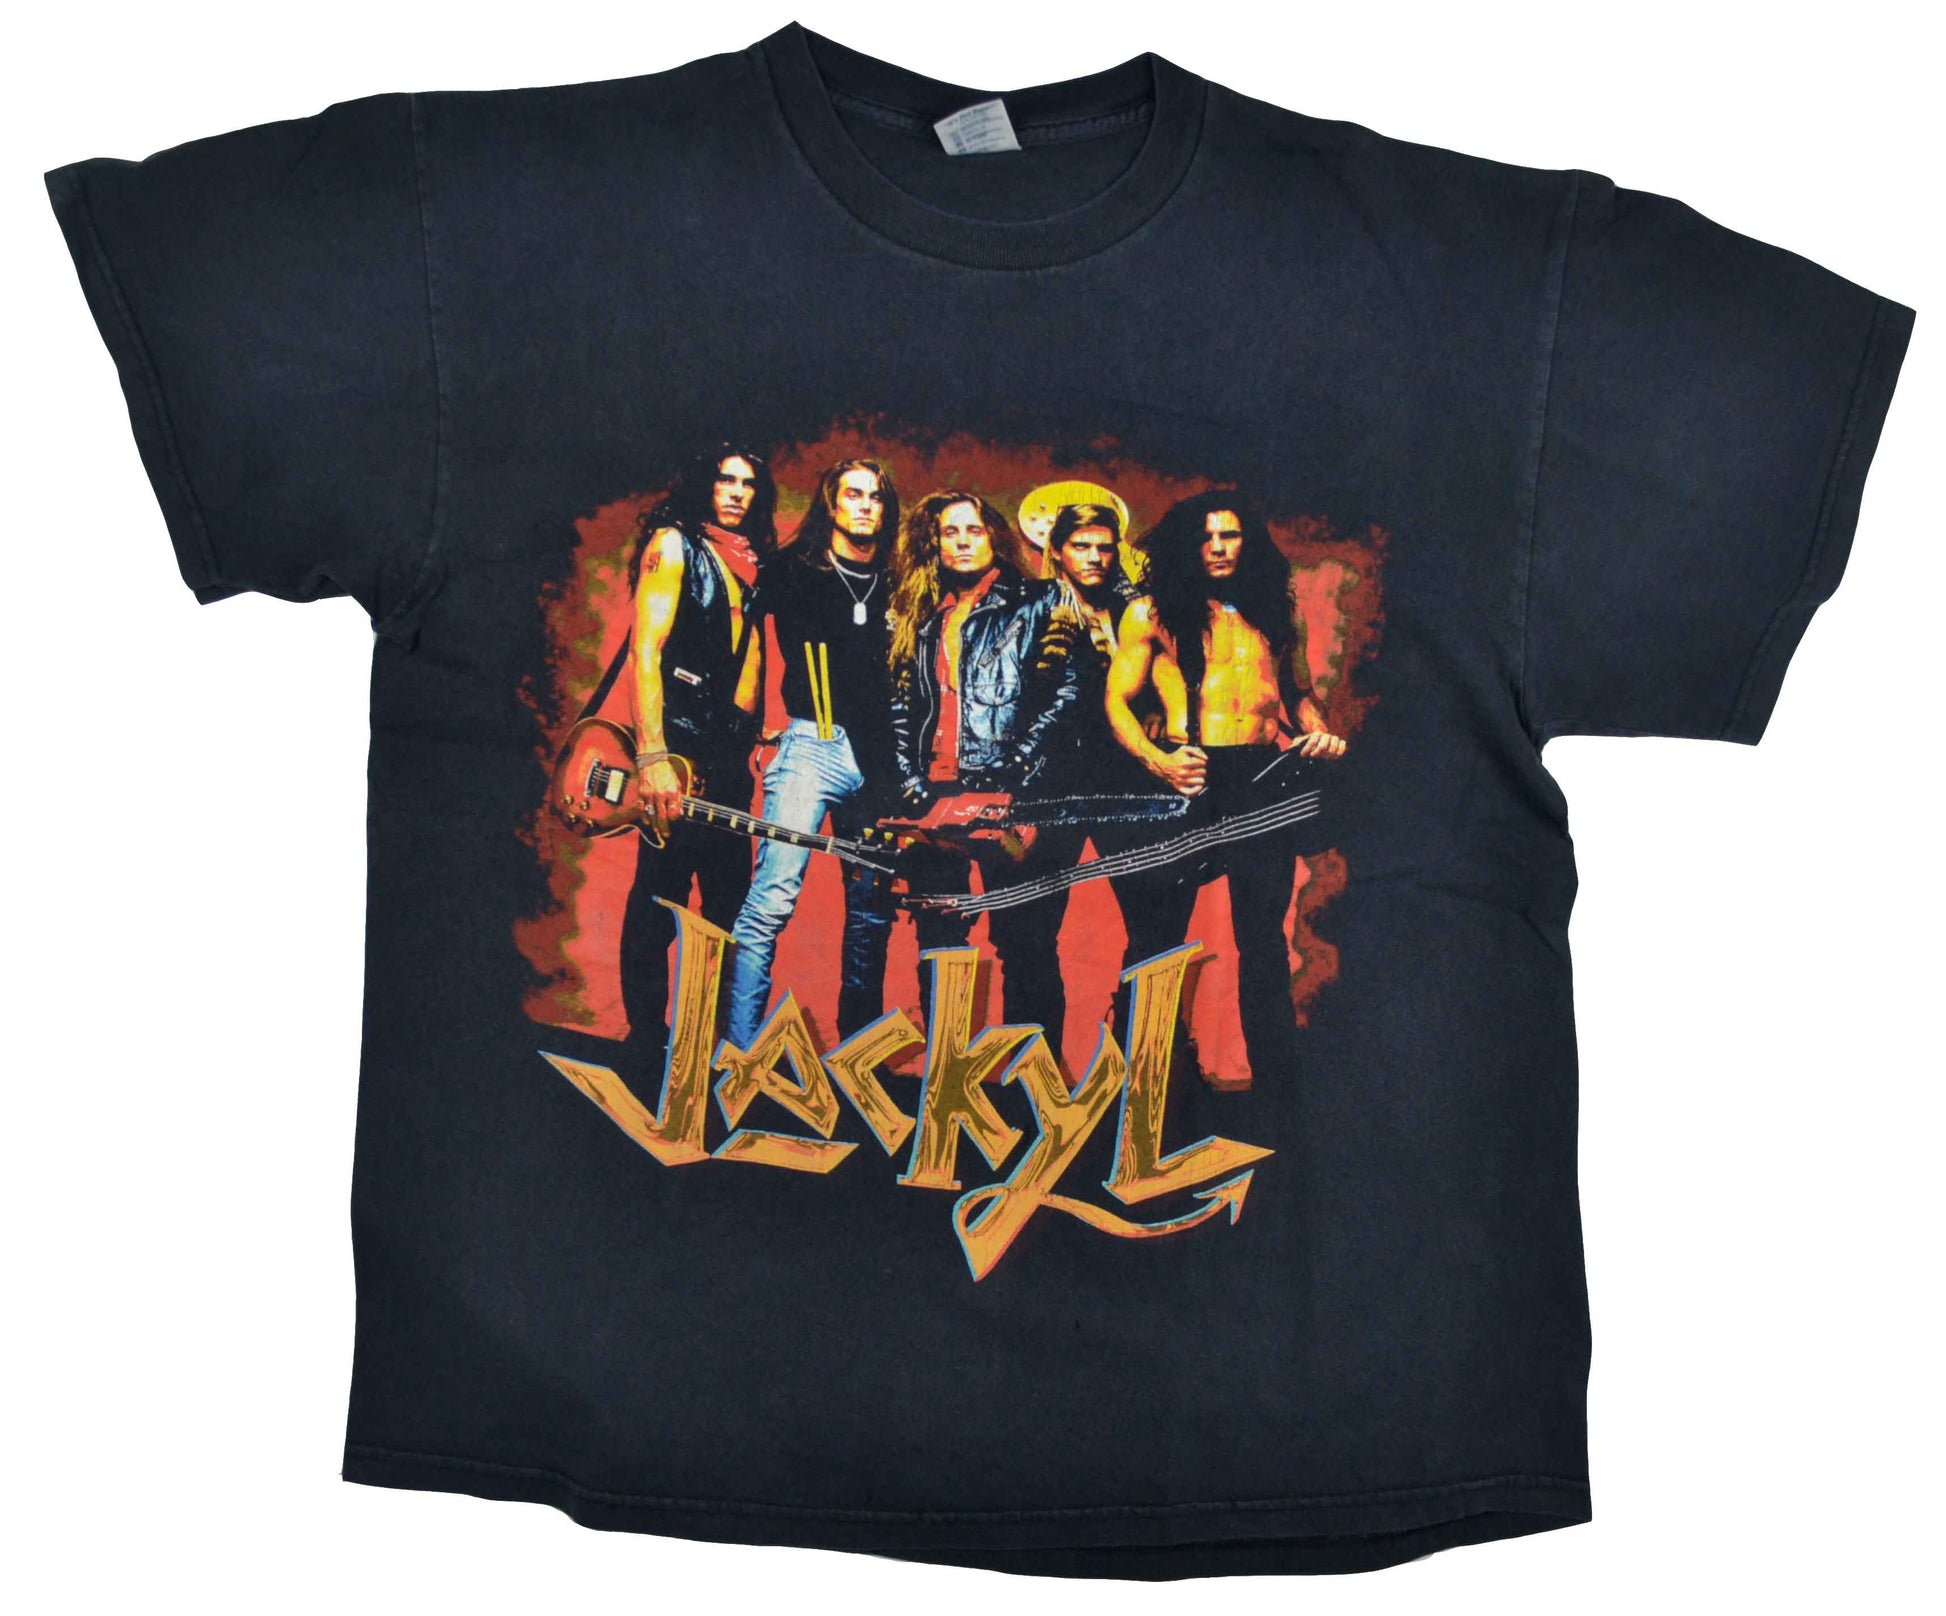 Vintage Band T-Shirt 1993 Jackyl "Rock Me Roll Me"  "I was born in the backwoods of a two-bit nowhere town". Do you remember what song this verse is from? If you are from the 90s surely yes. This is the first verse of the band's best known song, "The Lumberjack". The album that this song is part of, “Jackyl”, was certified Platinum in the US in 1992. The shirt presents an incredible look with minor retro damage.